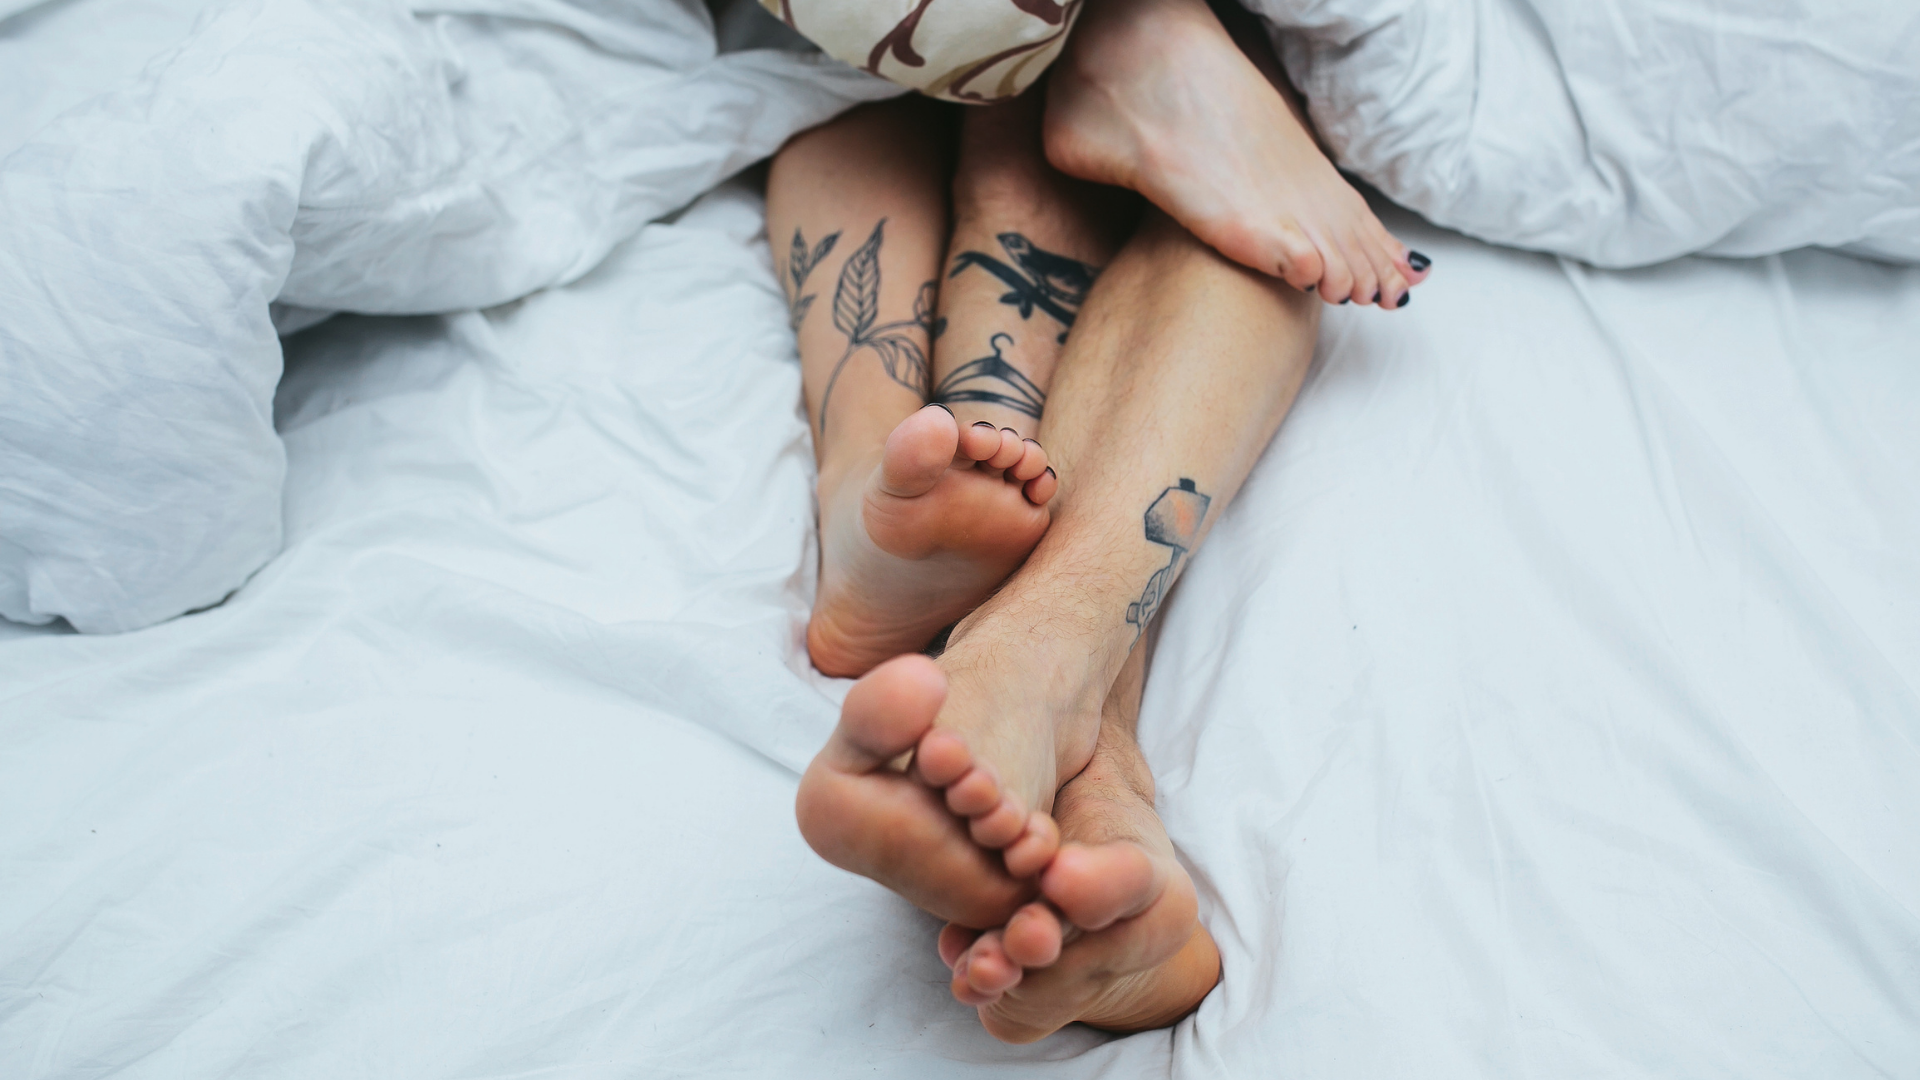 50 Best Sex Positions to Try Out in the Bedroom